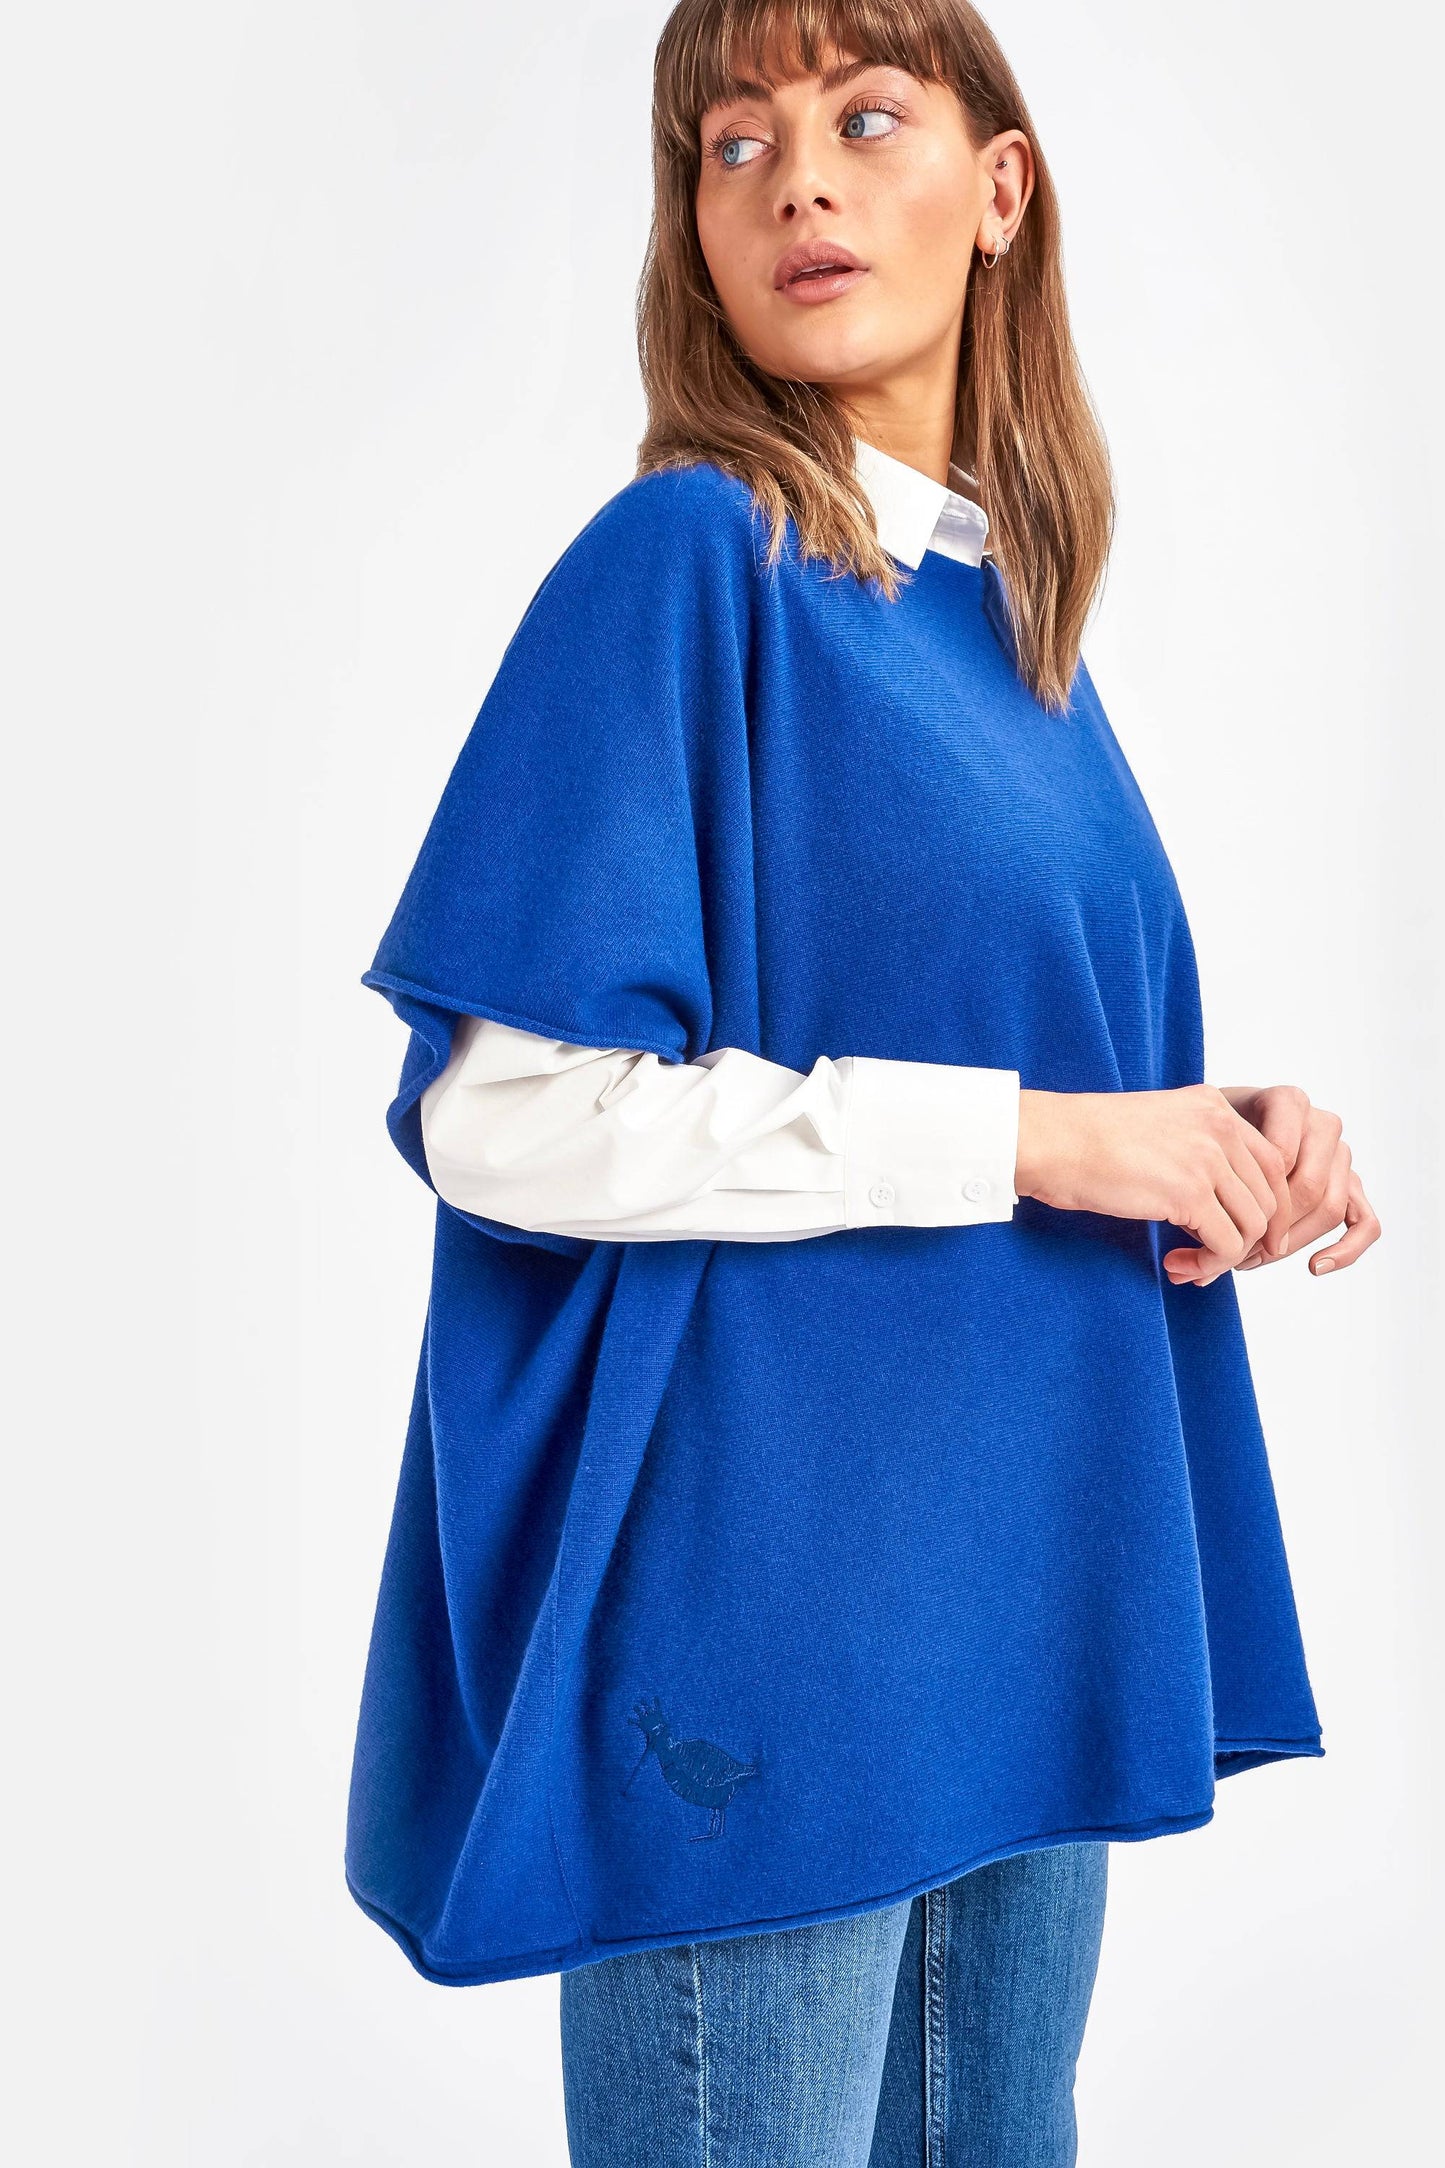 Cashmere & Merino Wool Boat Neck Poncho in Cobalt Blue By Woodcock & Cavendish for sale - Woodcock and Cavendish